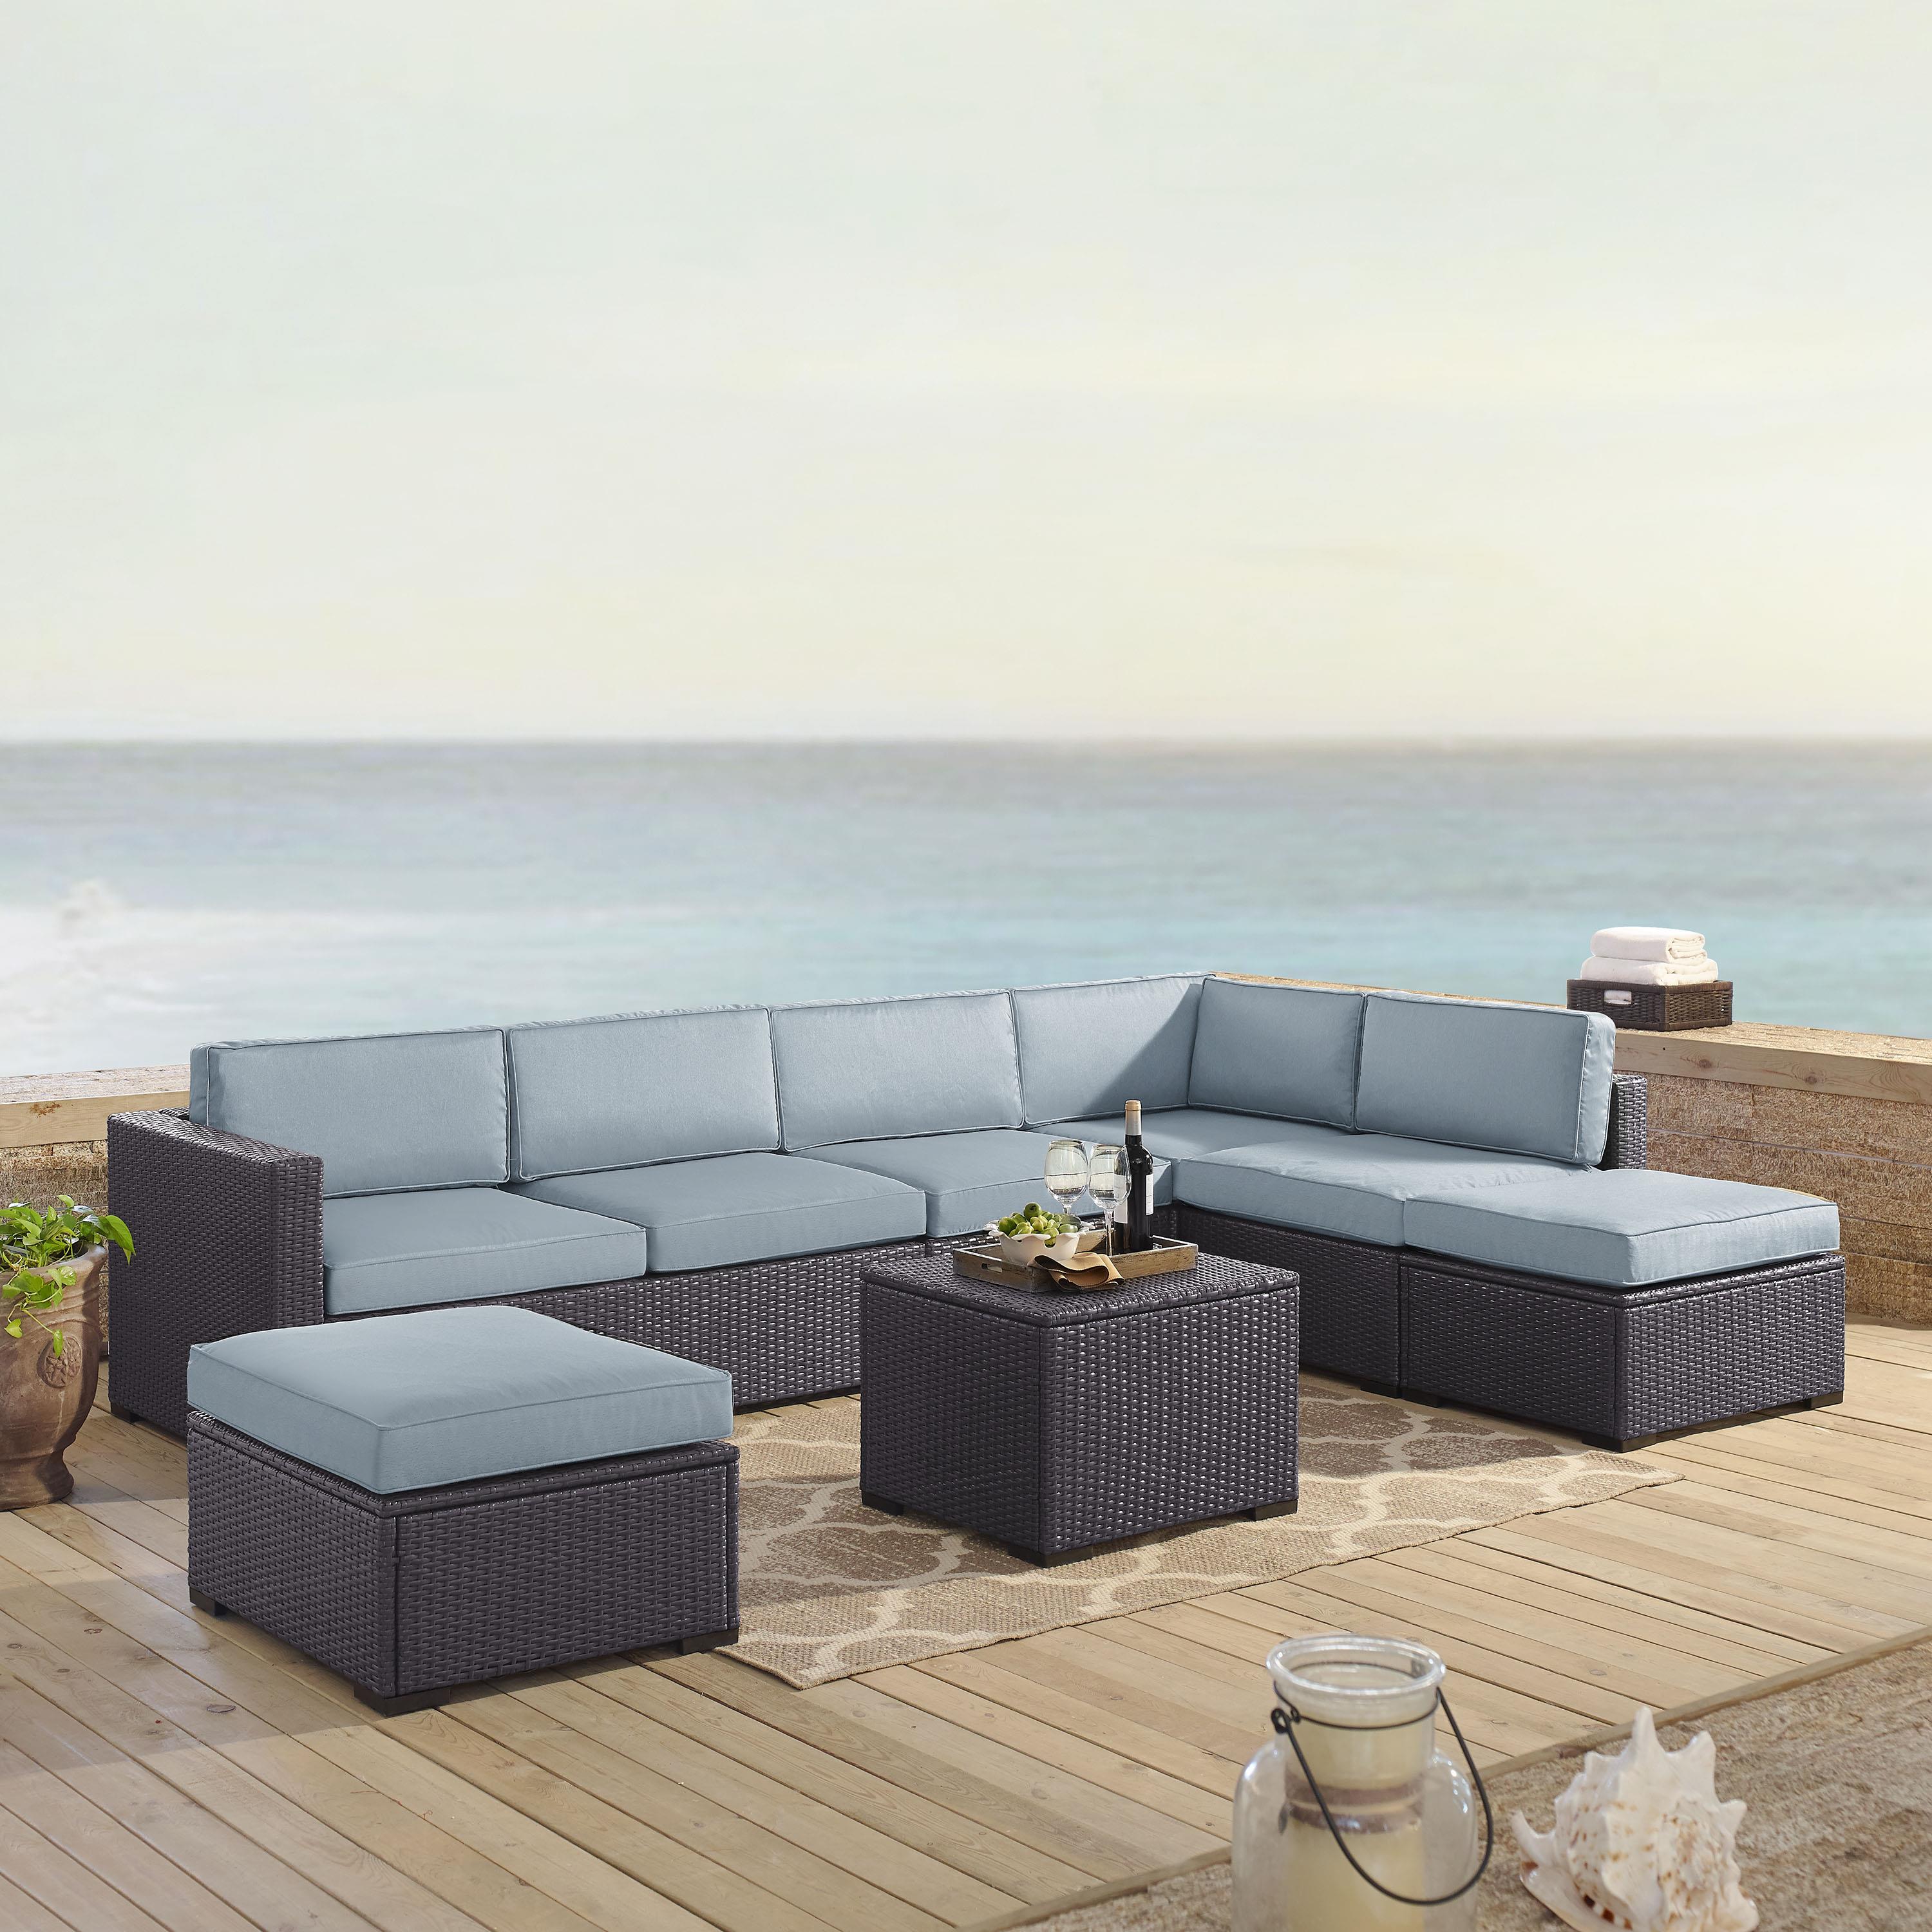 Crosley Furniture Biscayne 6 Piece Metal Patio Sectional Set in Brown & Blue - image 4 of 4